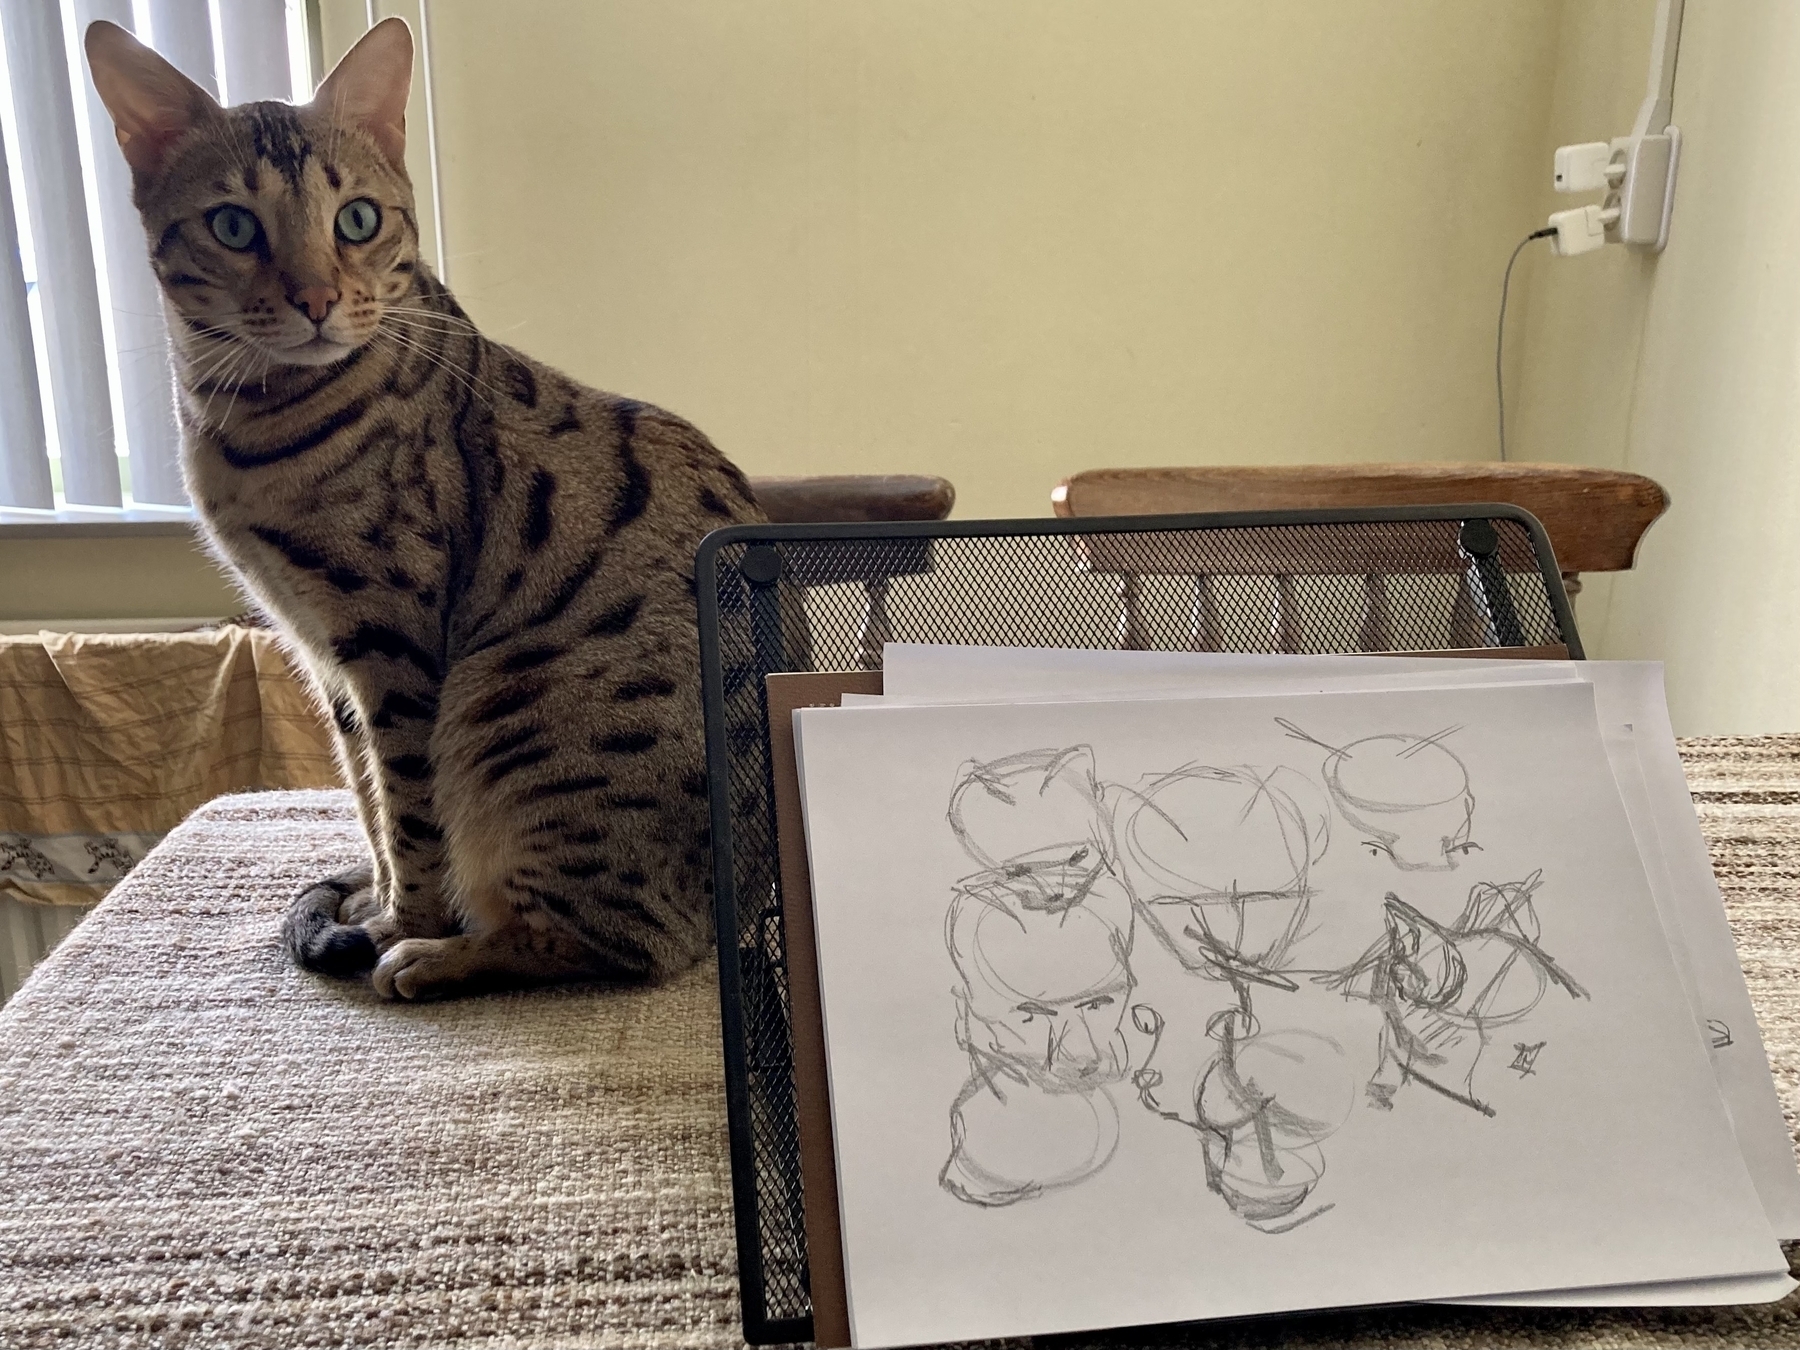 Cat sitting on table with sketches shown of this cat. 